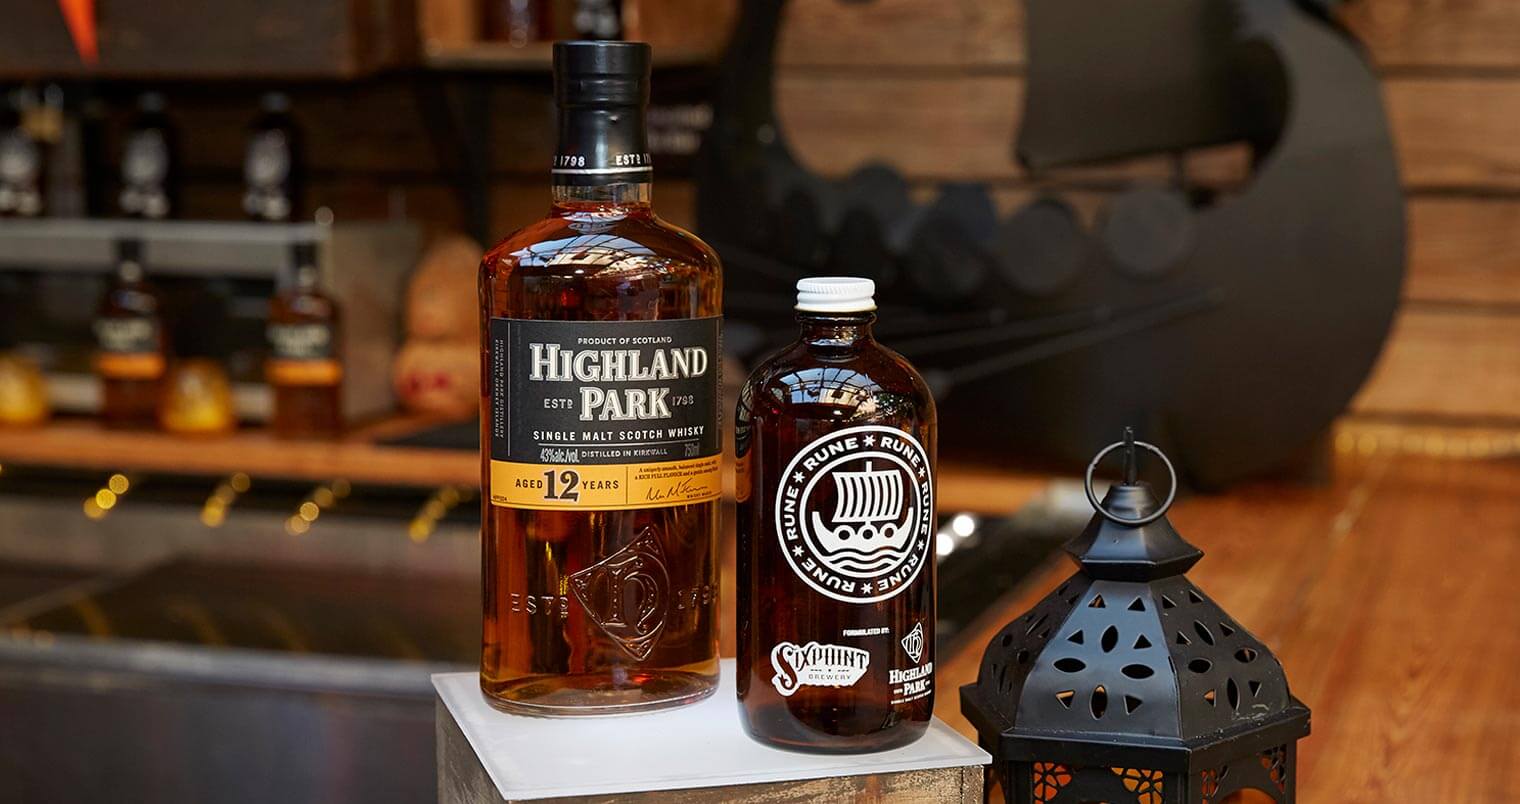 Highland Park Scotch Whisky & Sixpoint Brewery Team Up To Create Two Limited-Edition Beers, featured image